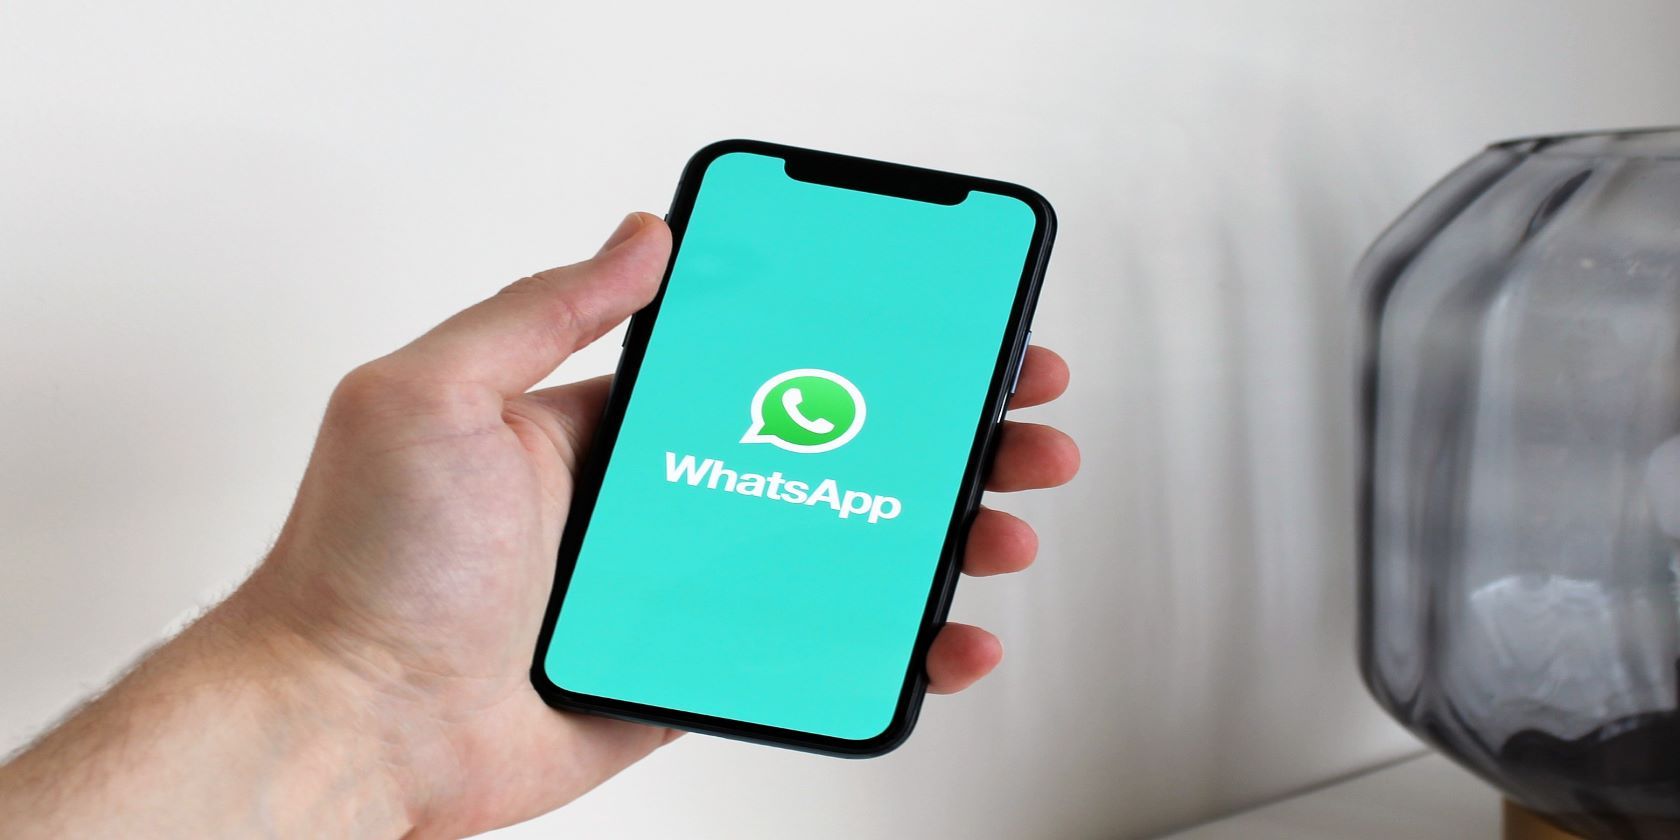 person holding a phone showing the WhatsApp app logo